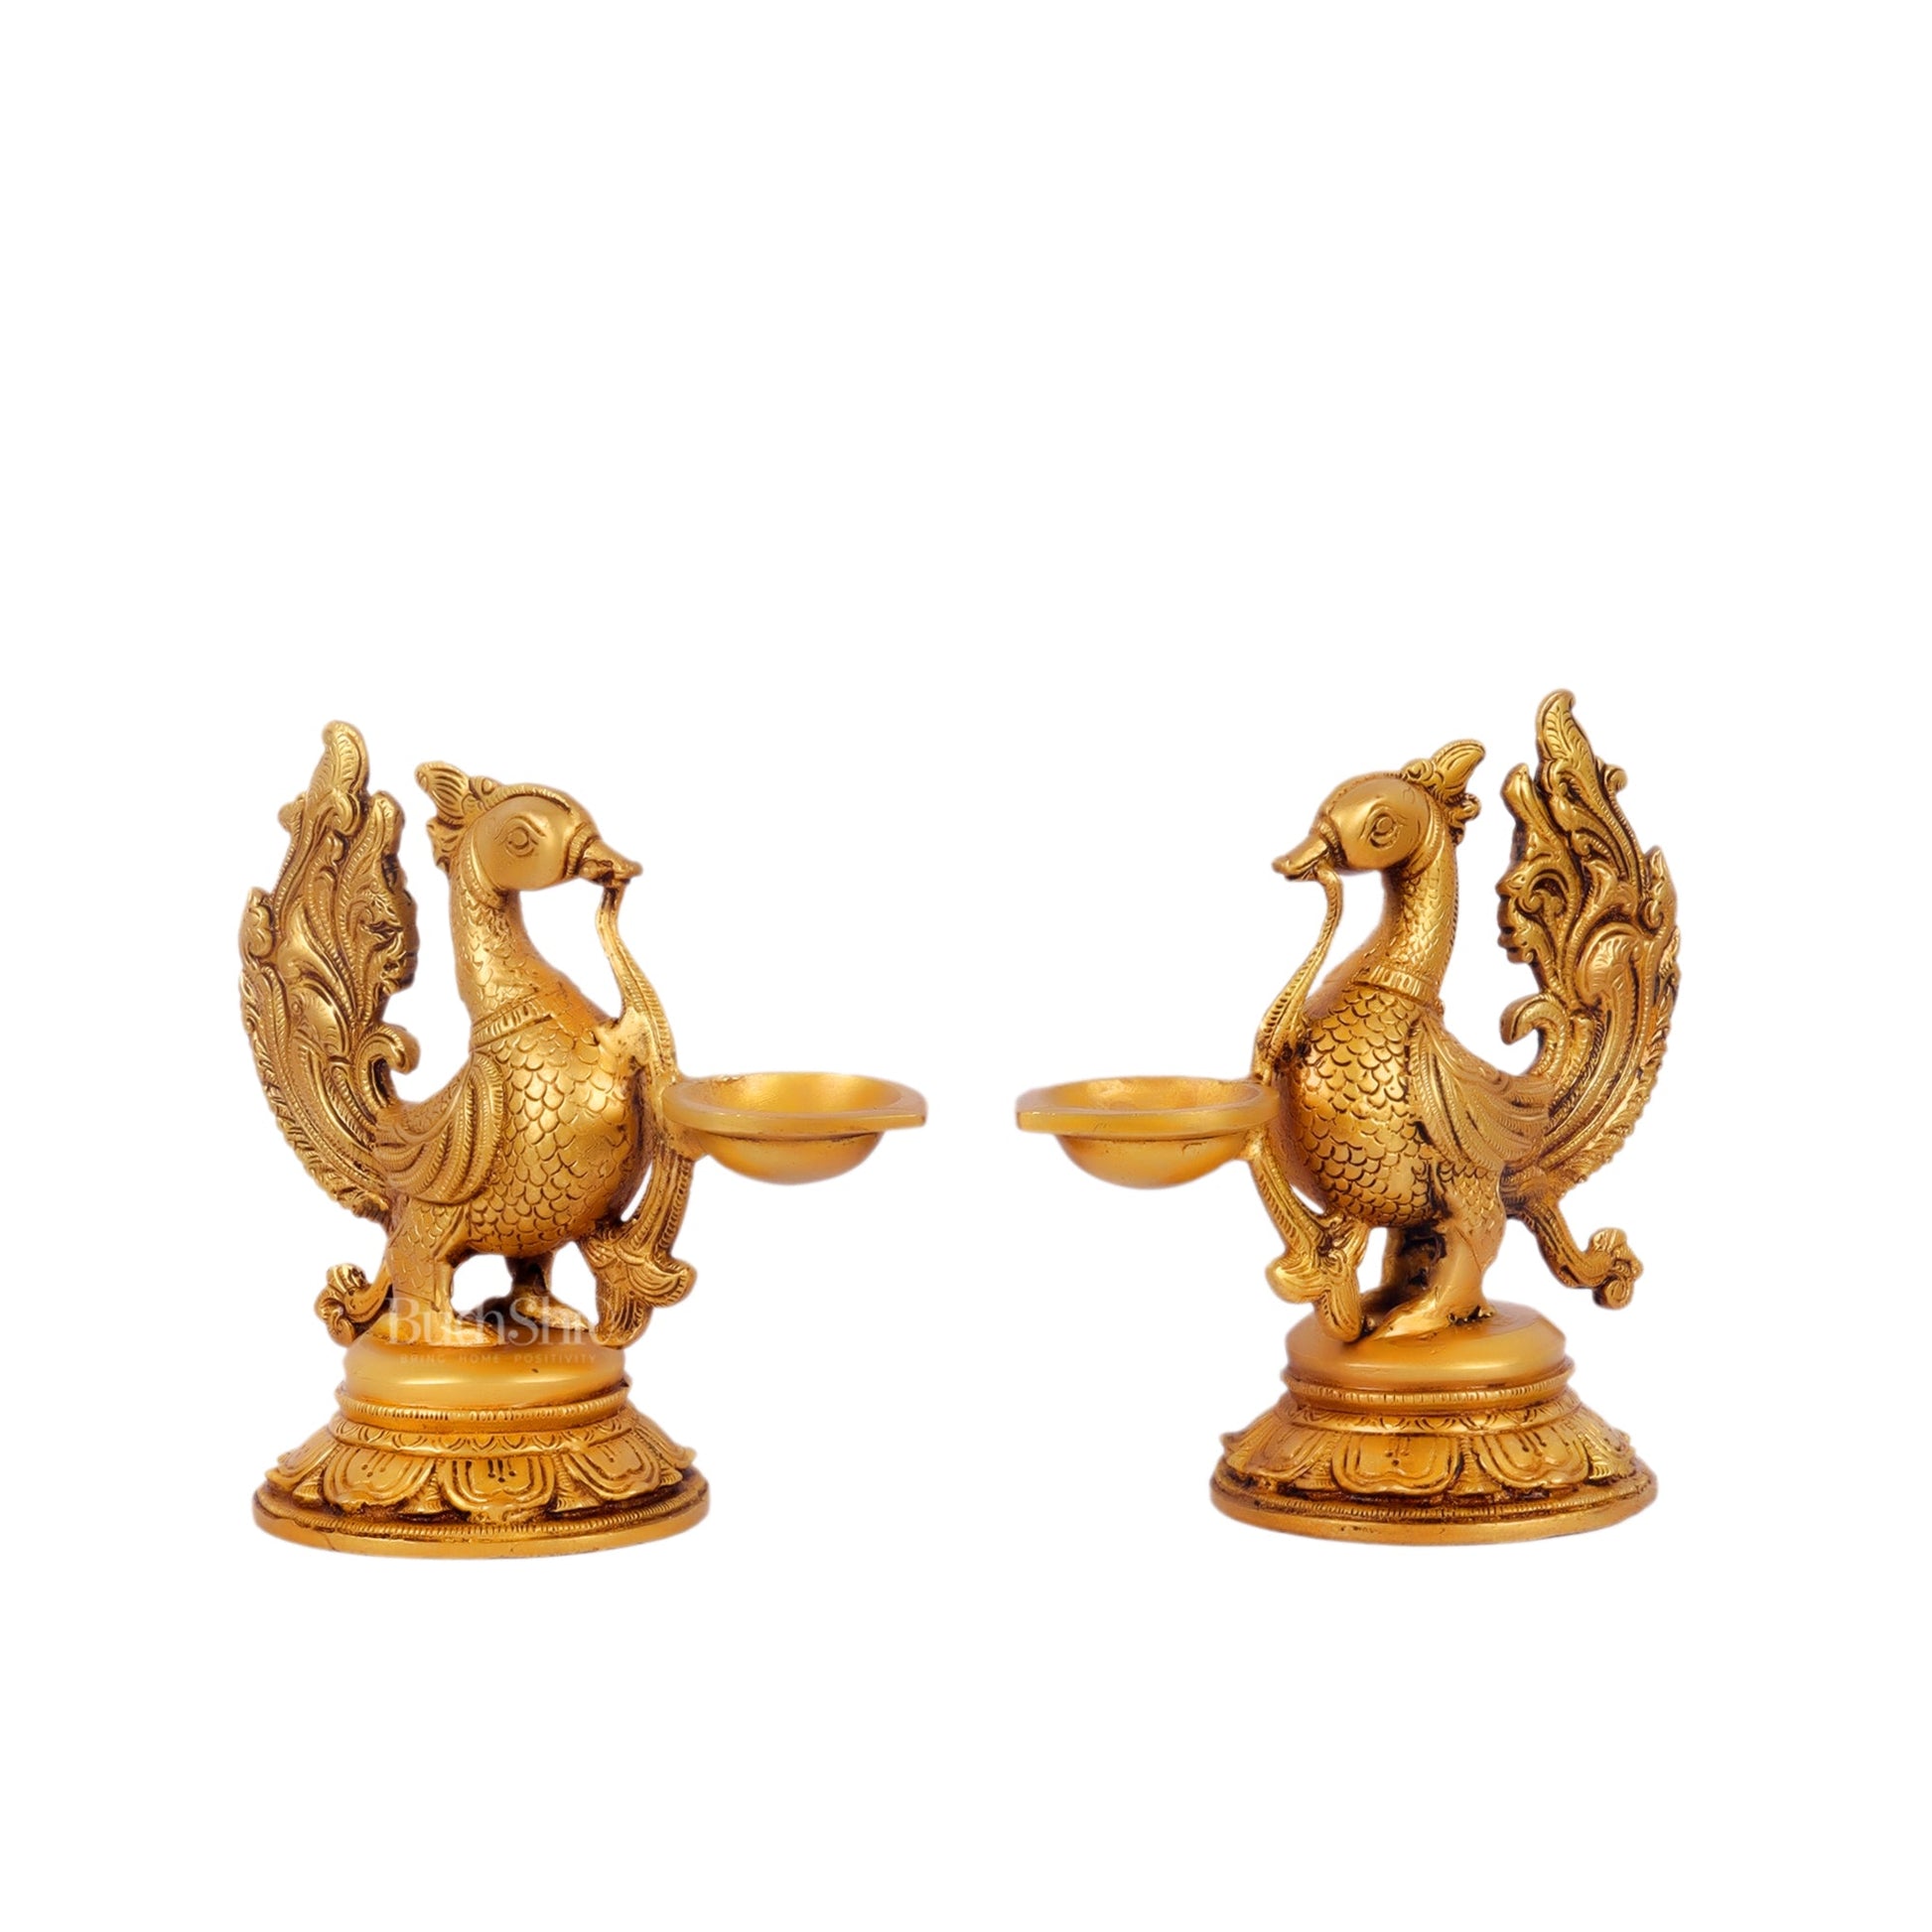 Pair of Handcrafted Brass Annam Diyas | Height 7.5 inches - Budhshiv.com